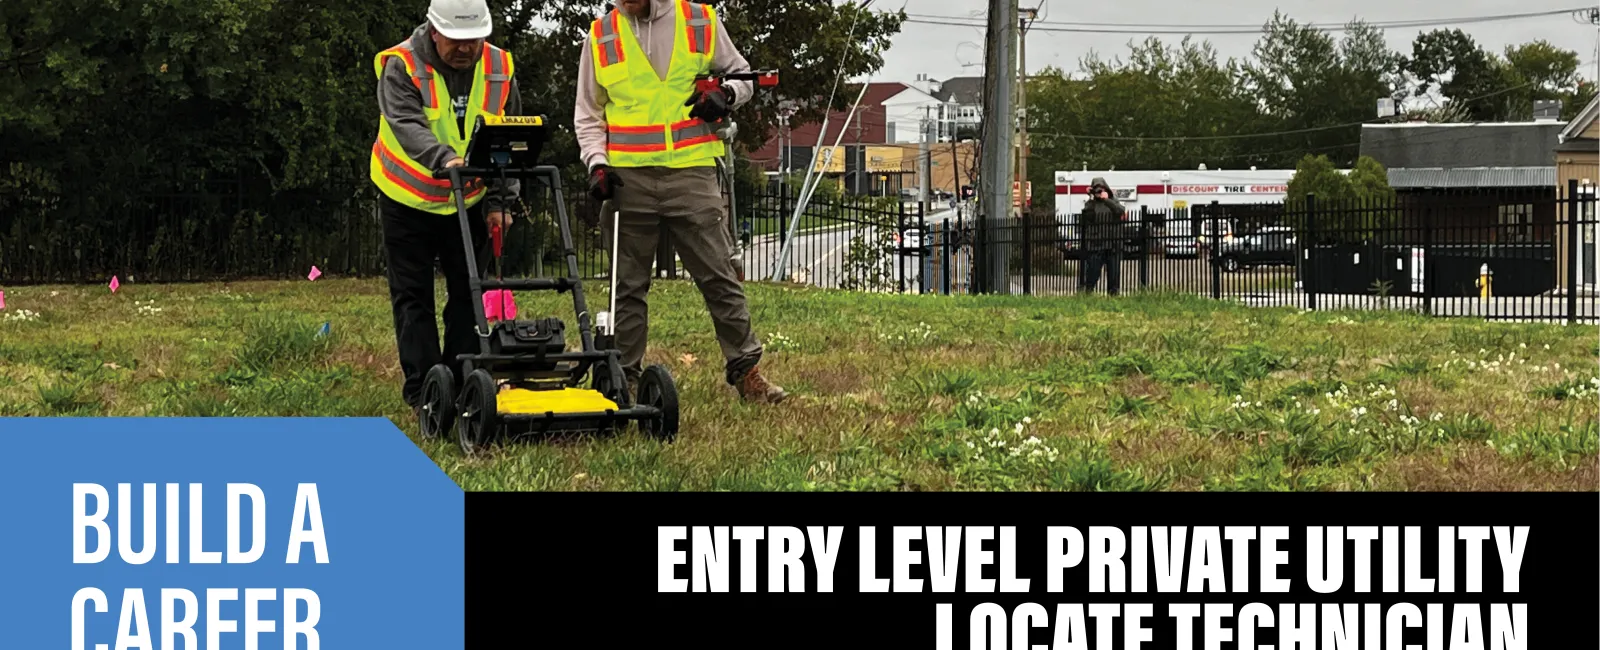 a couple of men wearing safety vests and standing next to a lawn mower